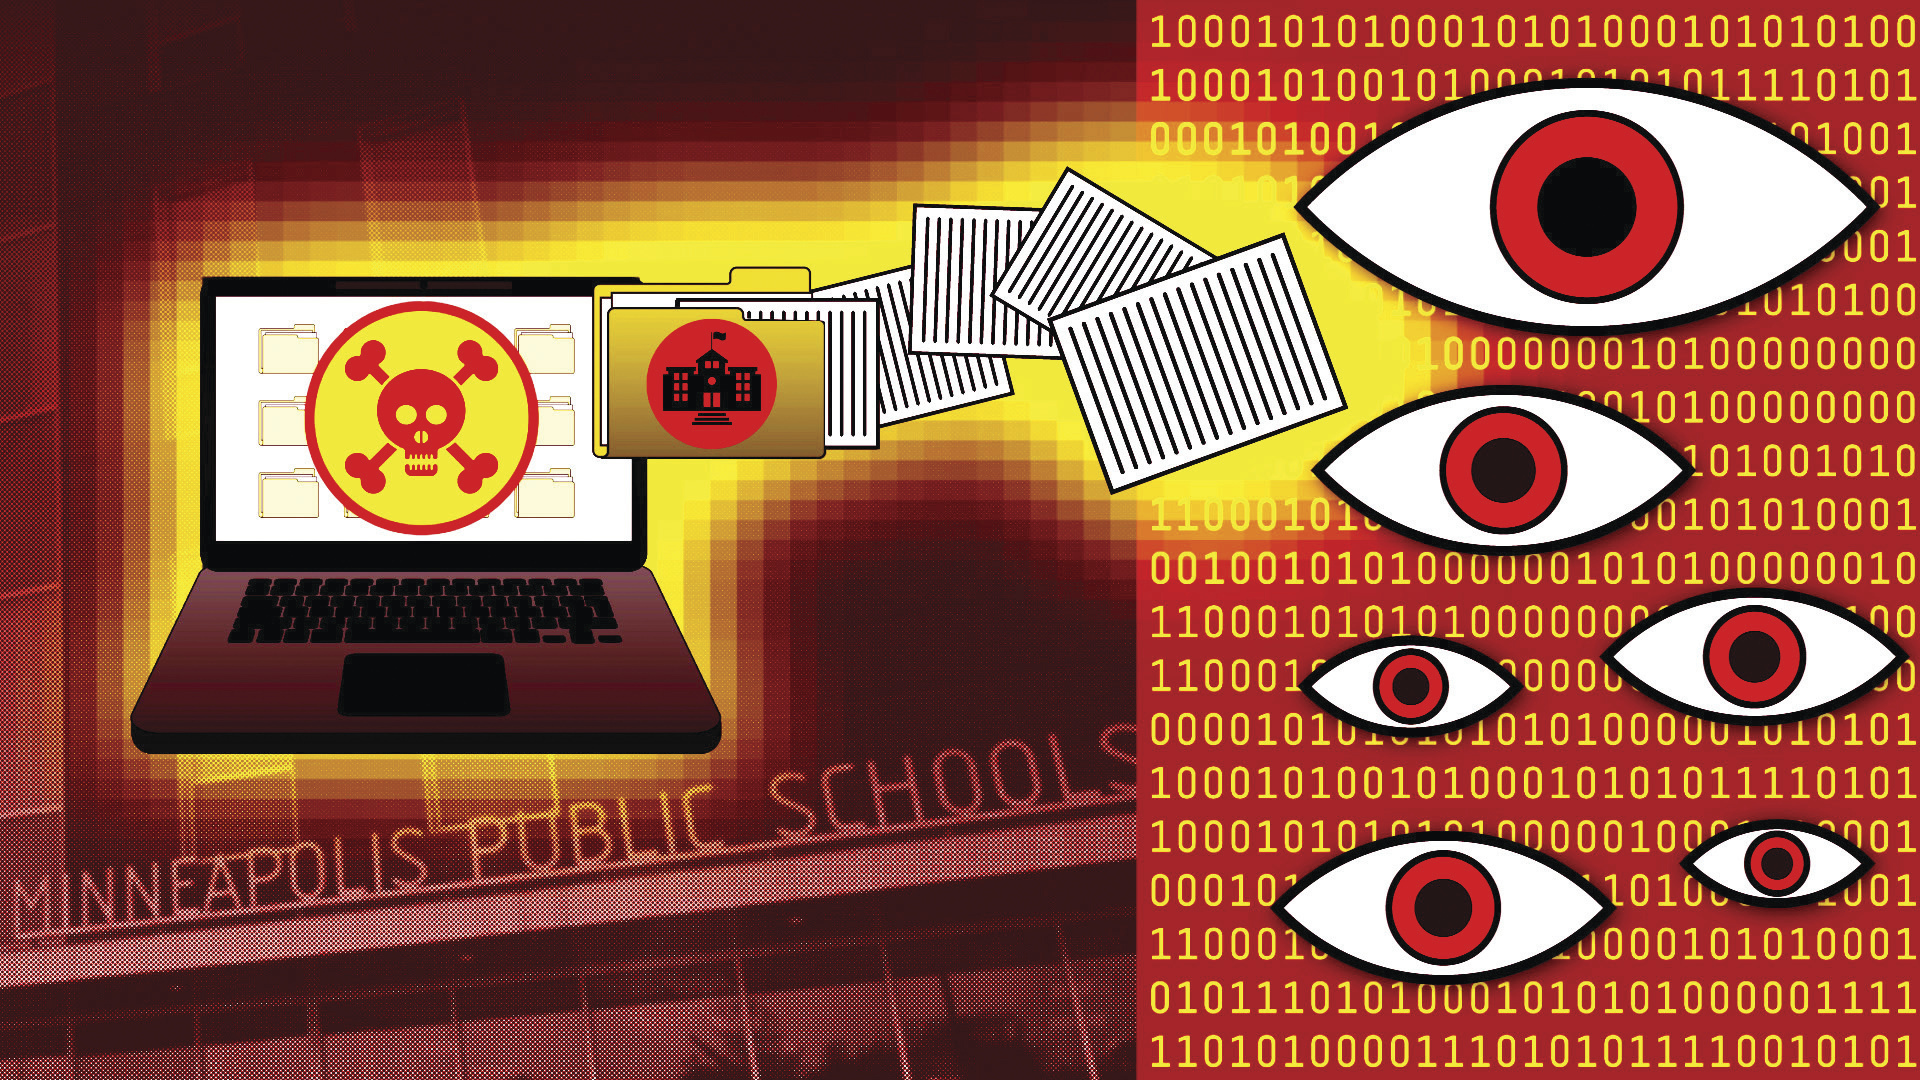 School ransomware attacks: Red, orange, yellow and black illustration with open laptop surrounded by floating documents and red eyes on binary code of ones and zeros background.